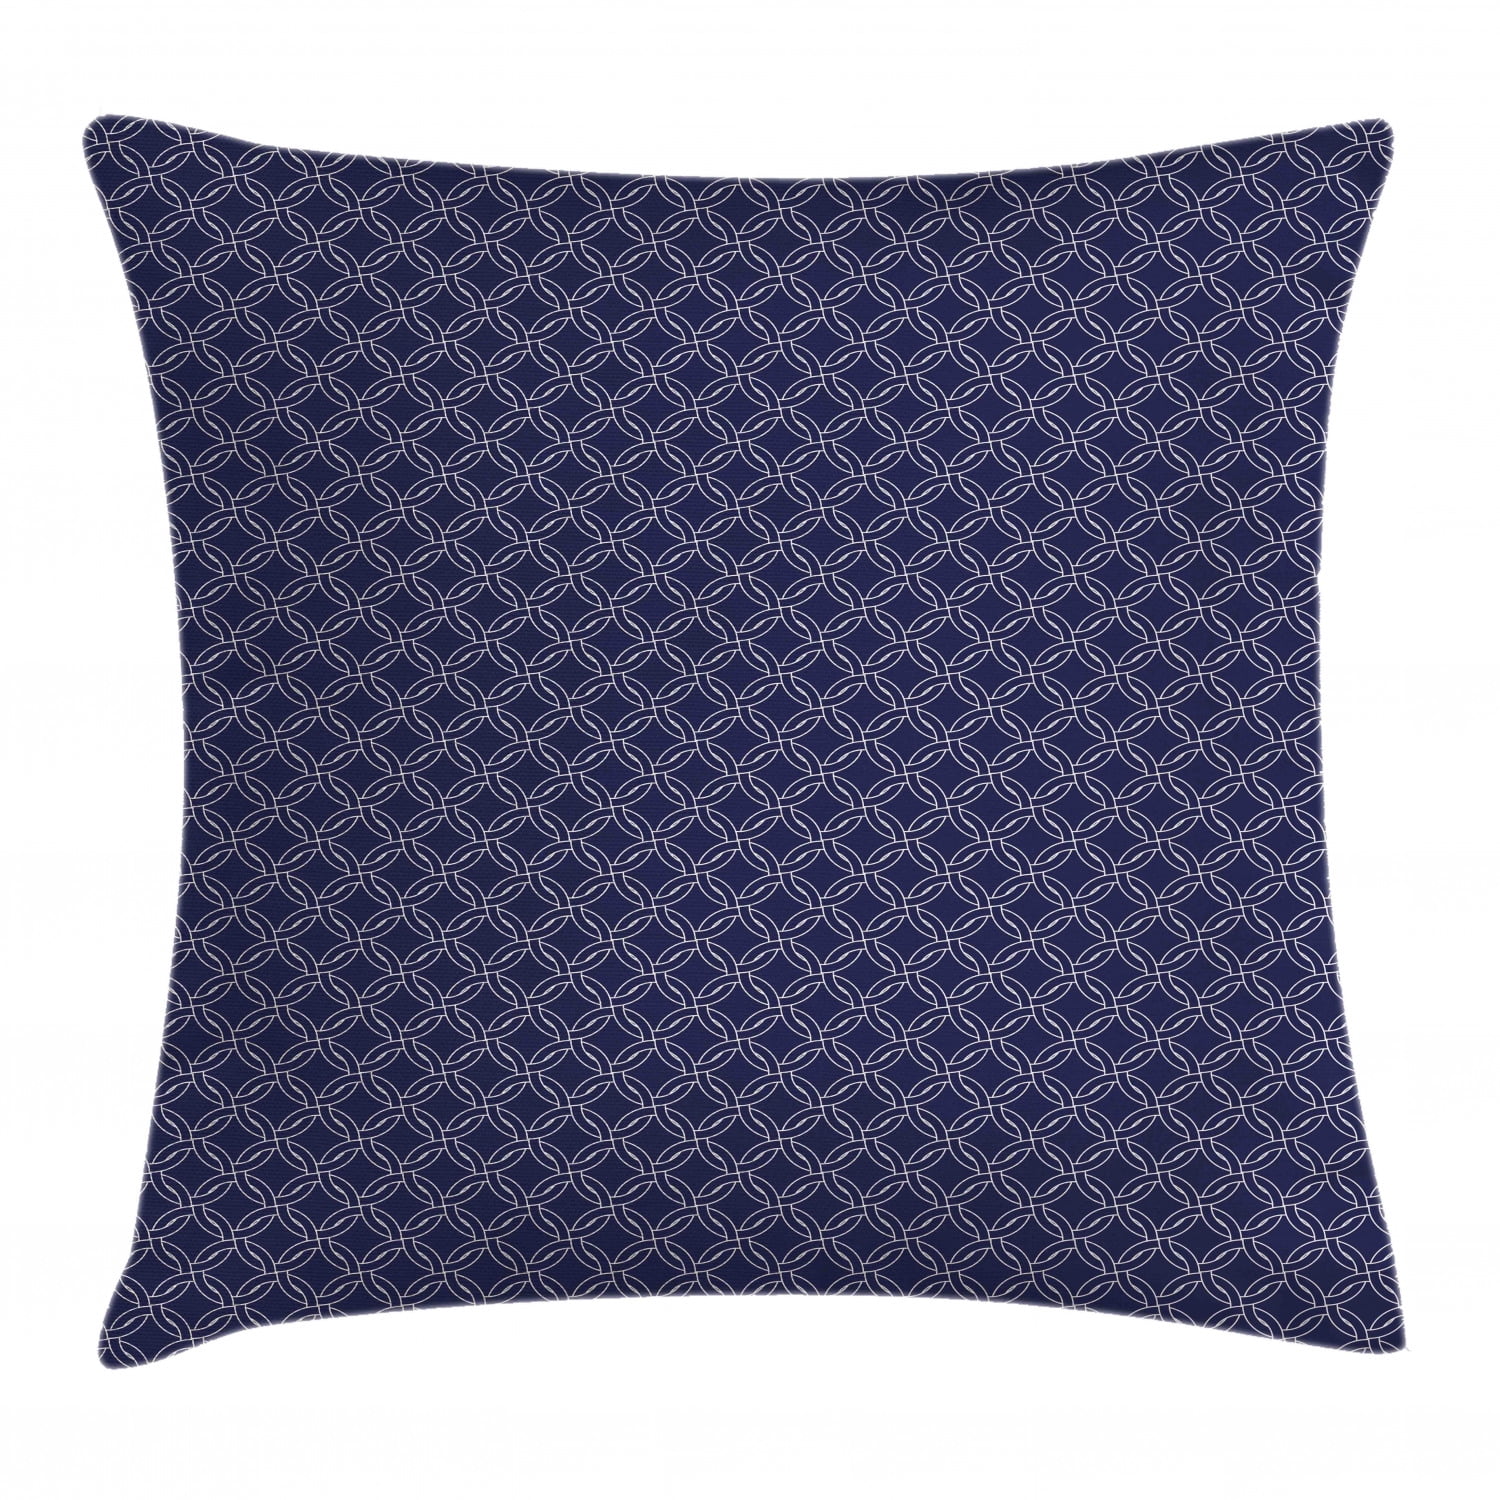 Navy Blue Throw Pillow Cushion Cover, Abstract Geometric Entangled ...